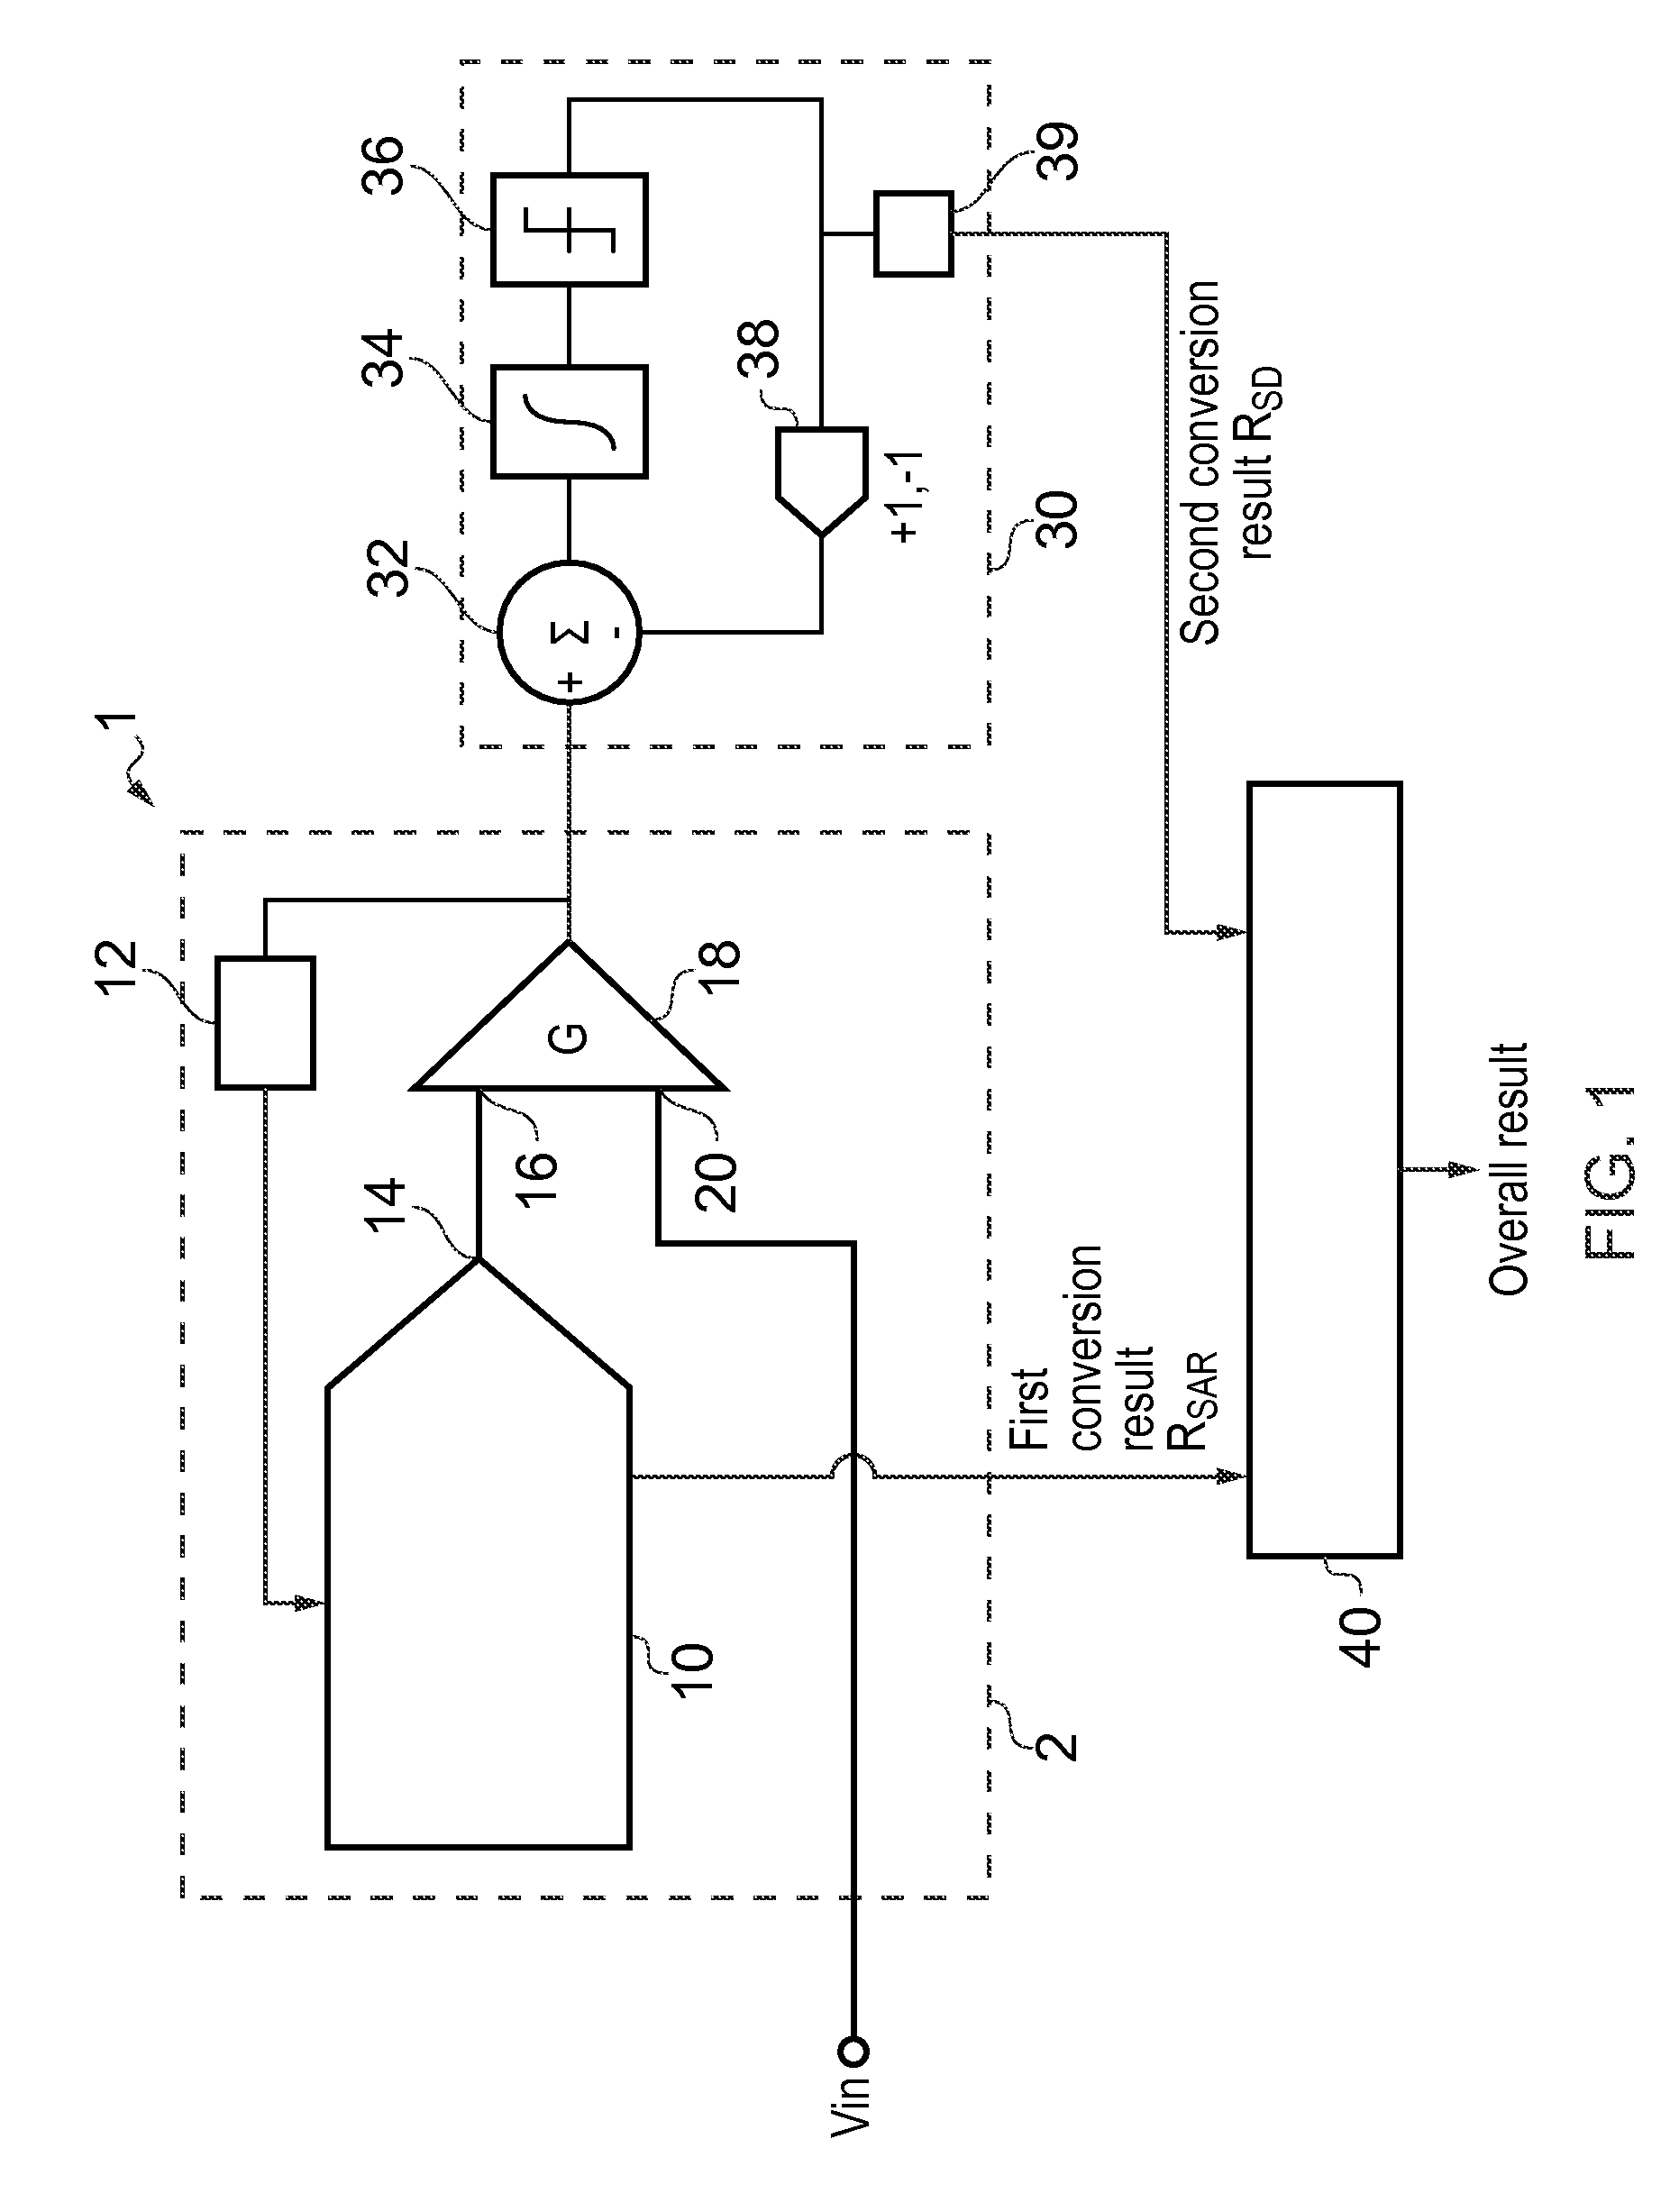 Apparatus for and method of performing an analog to digital conversion